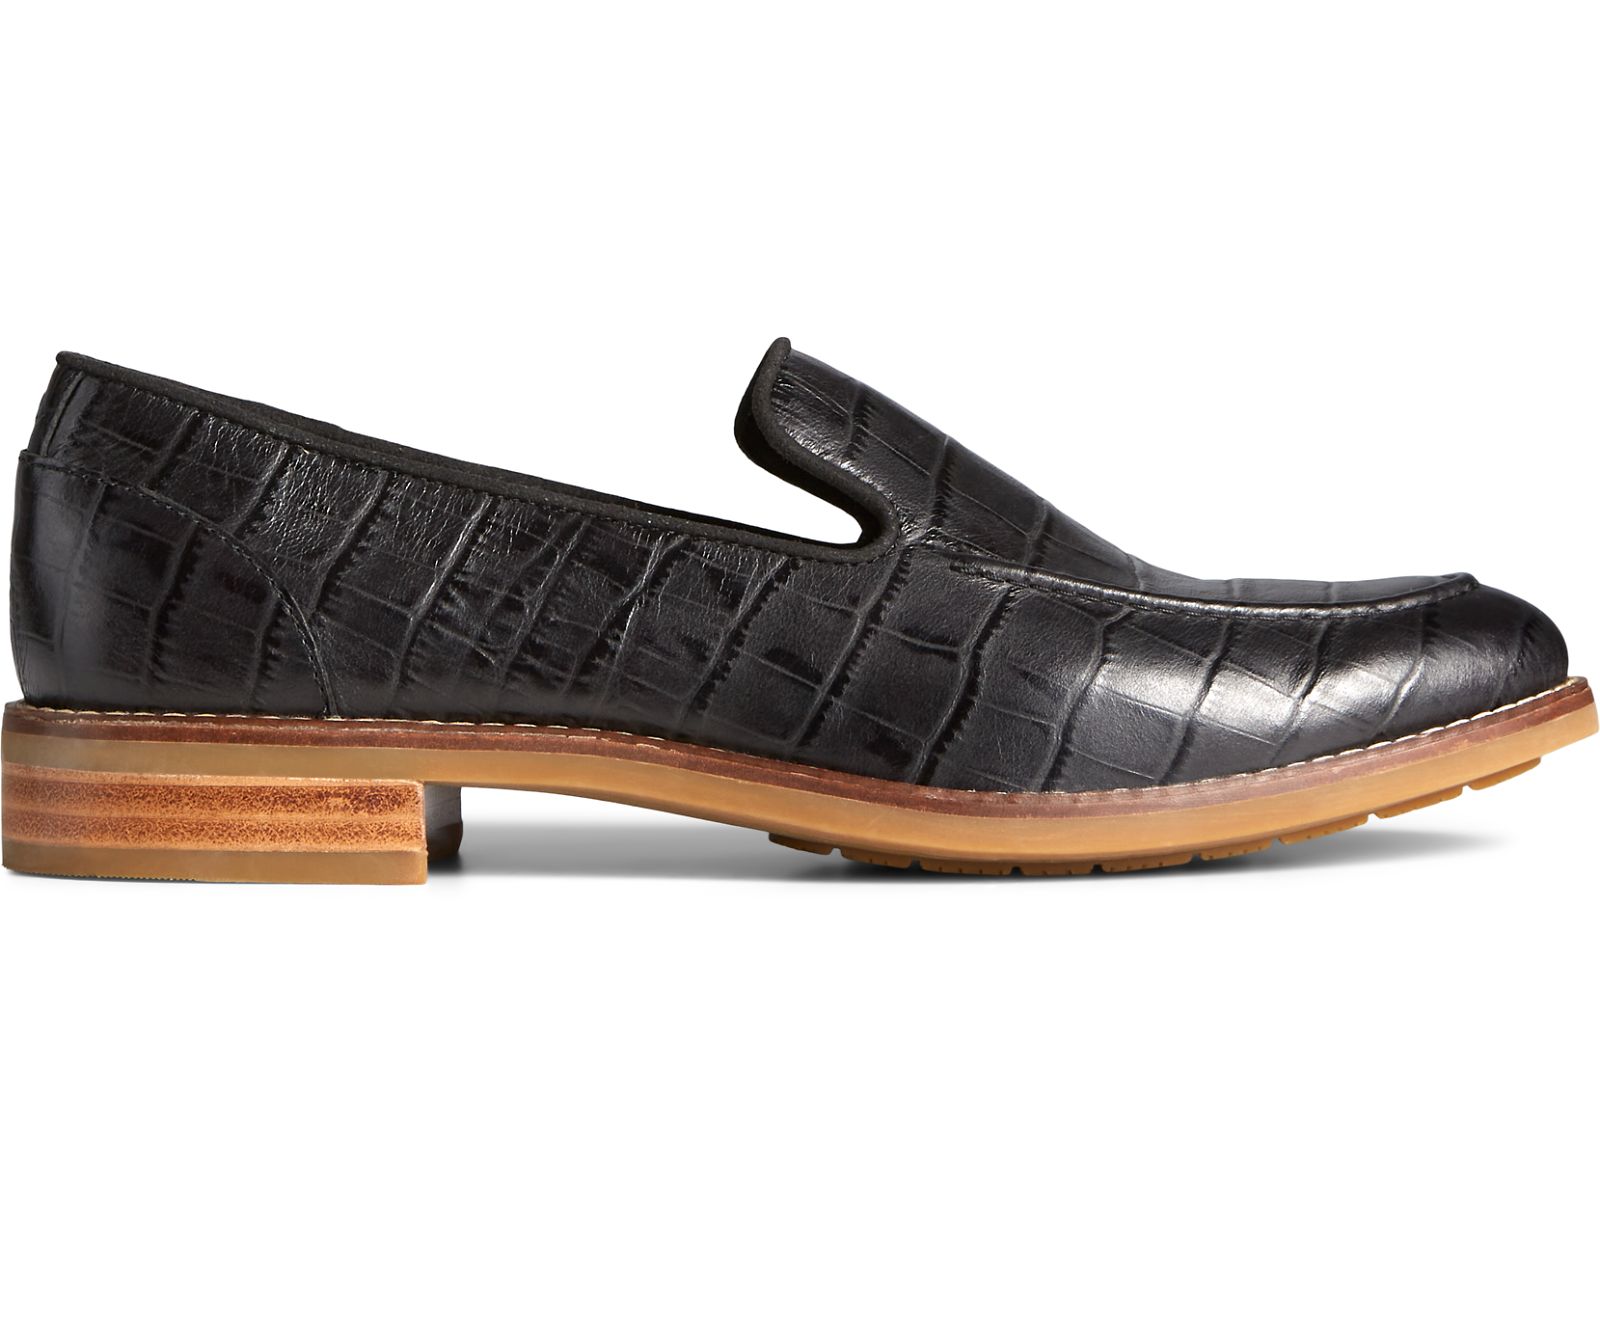 Women's Fairpoint Croc Leather Loafer - Black